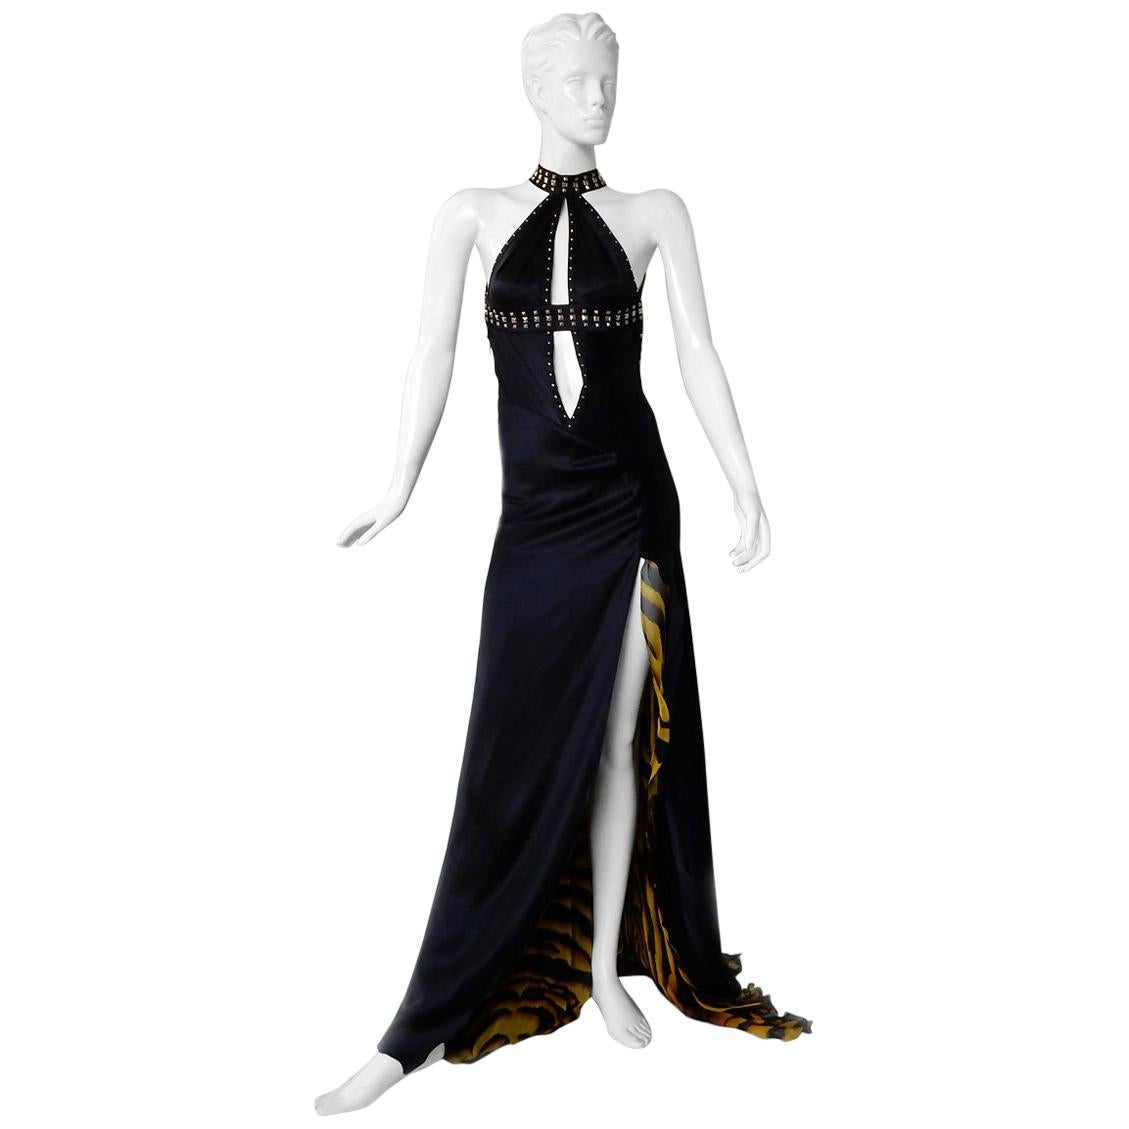 Versace Bondage Dress Gown with Plunging Neckline & Thigh High Slit   New!